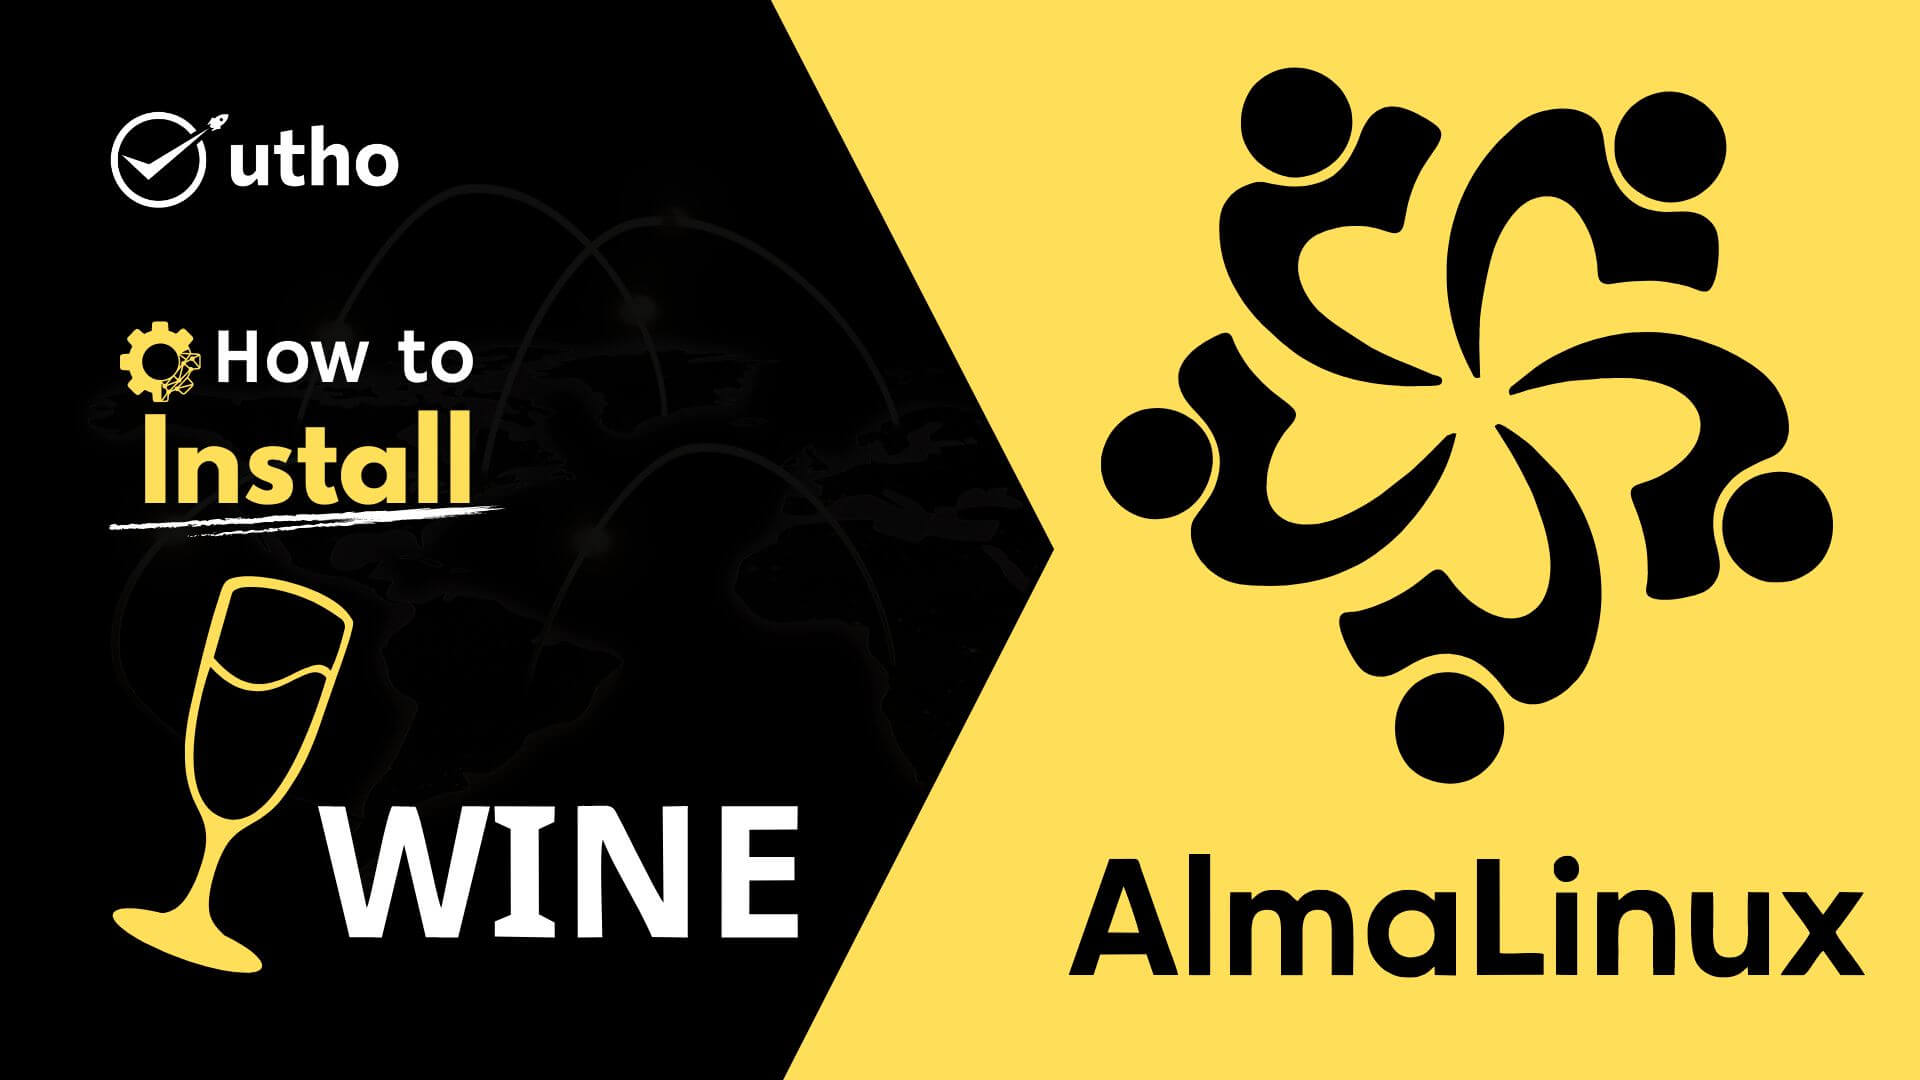 How to install Wine on Alma Linux